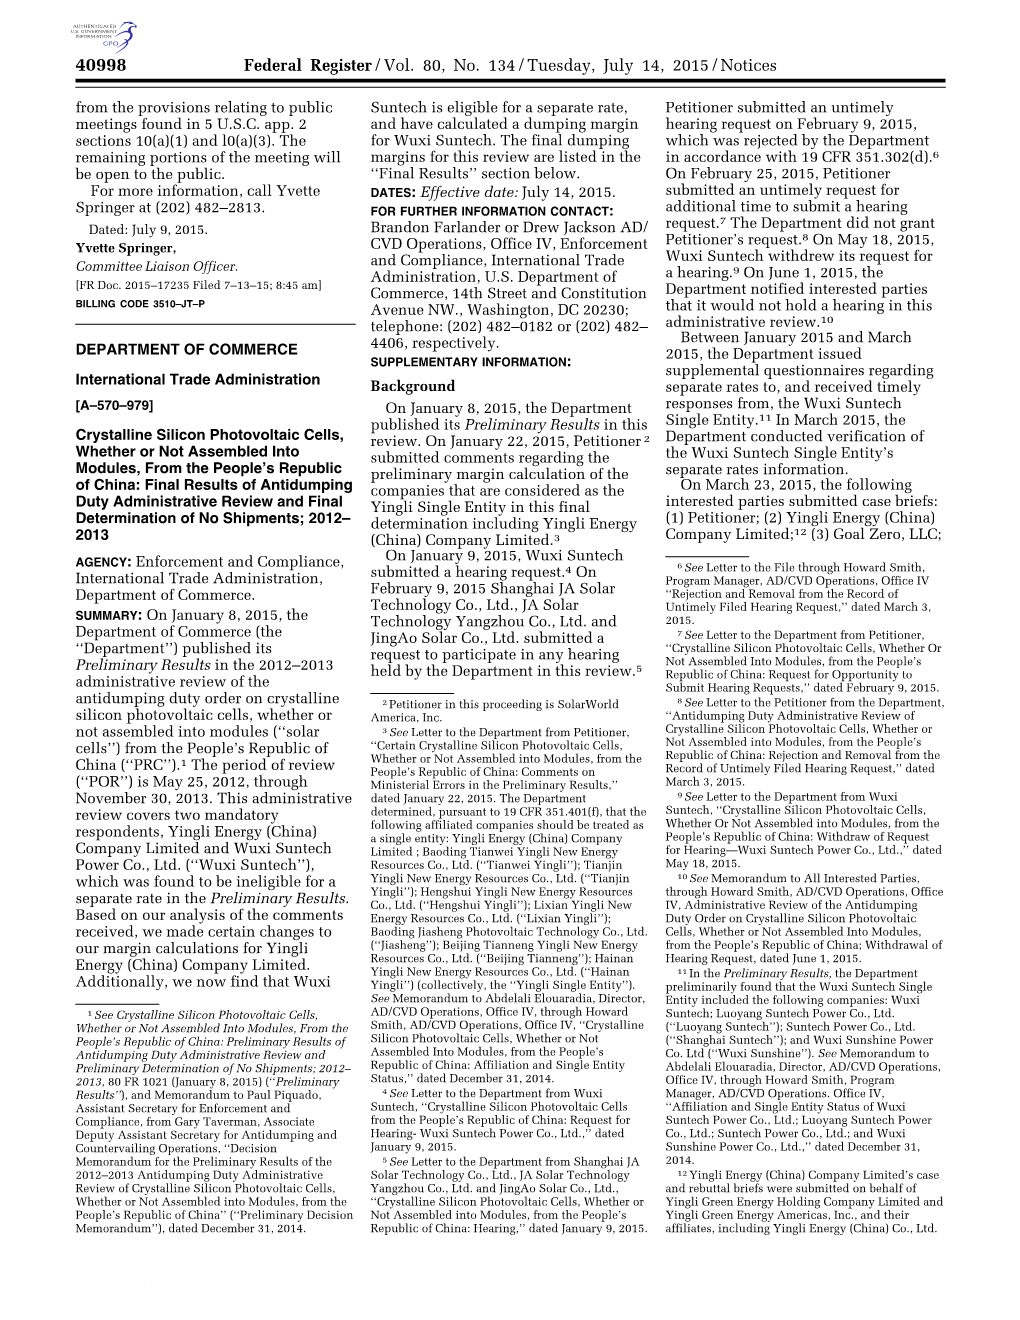 Federal Register/Vol. 80, No. 134/Tuesday, July 14, 2015/Notices